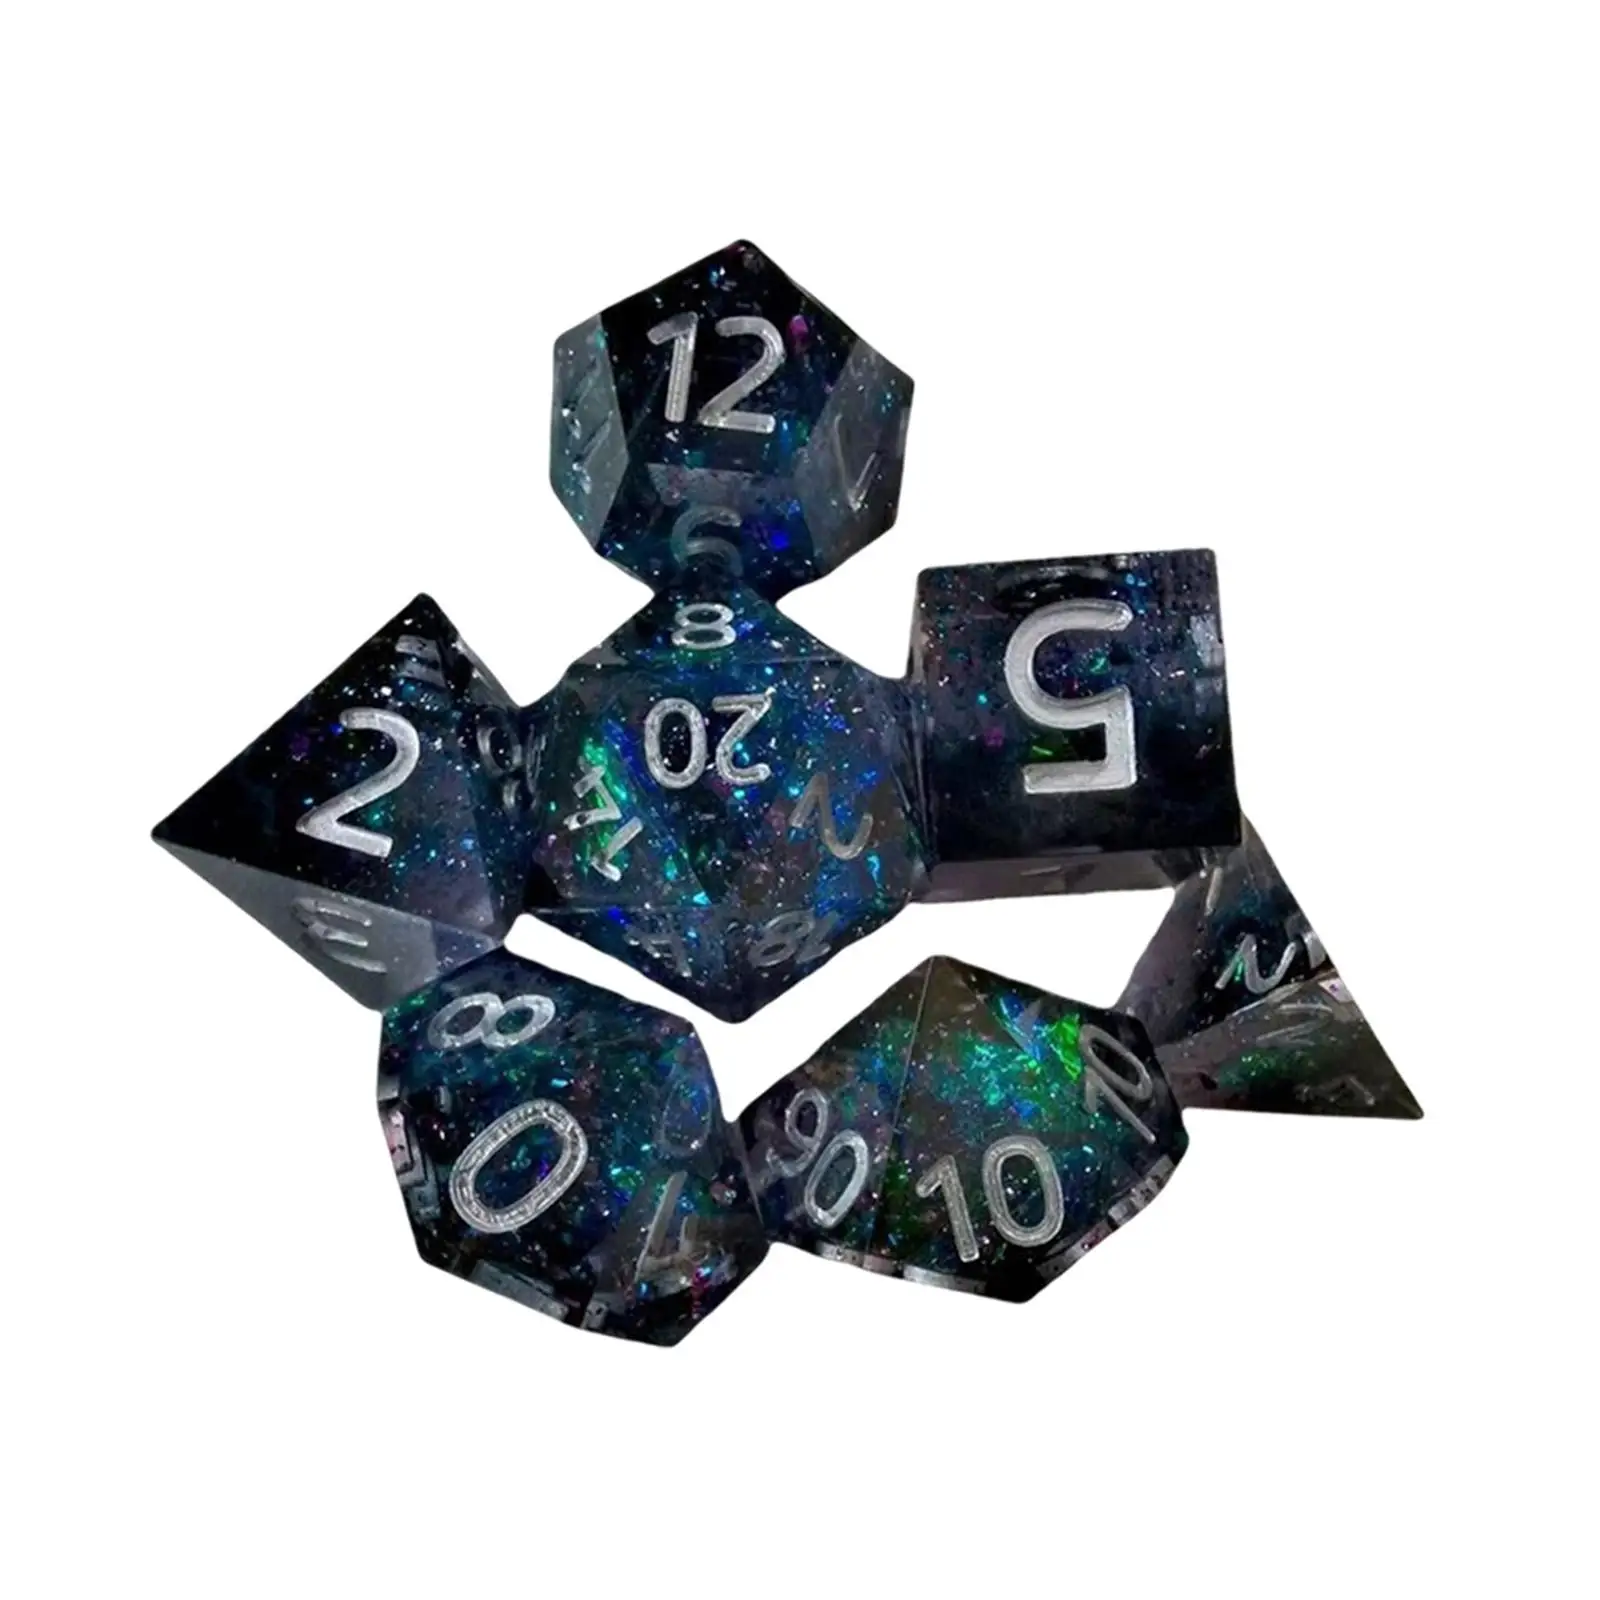 7 Pieces Resin Polyhedron Dices Entertainment Toy for Role Playing Game